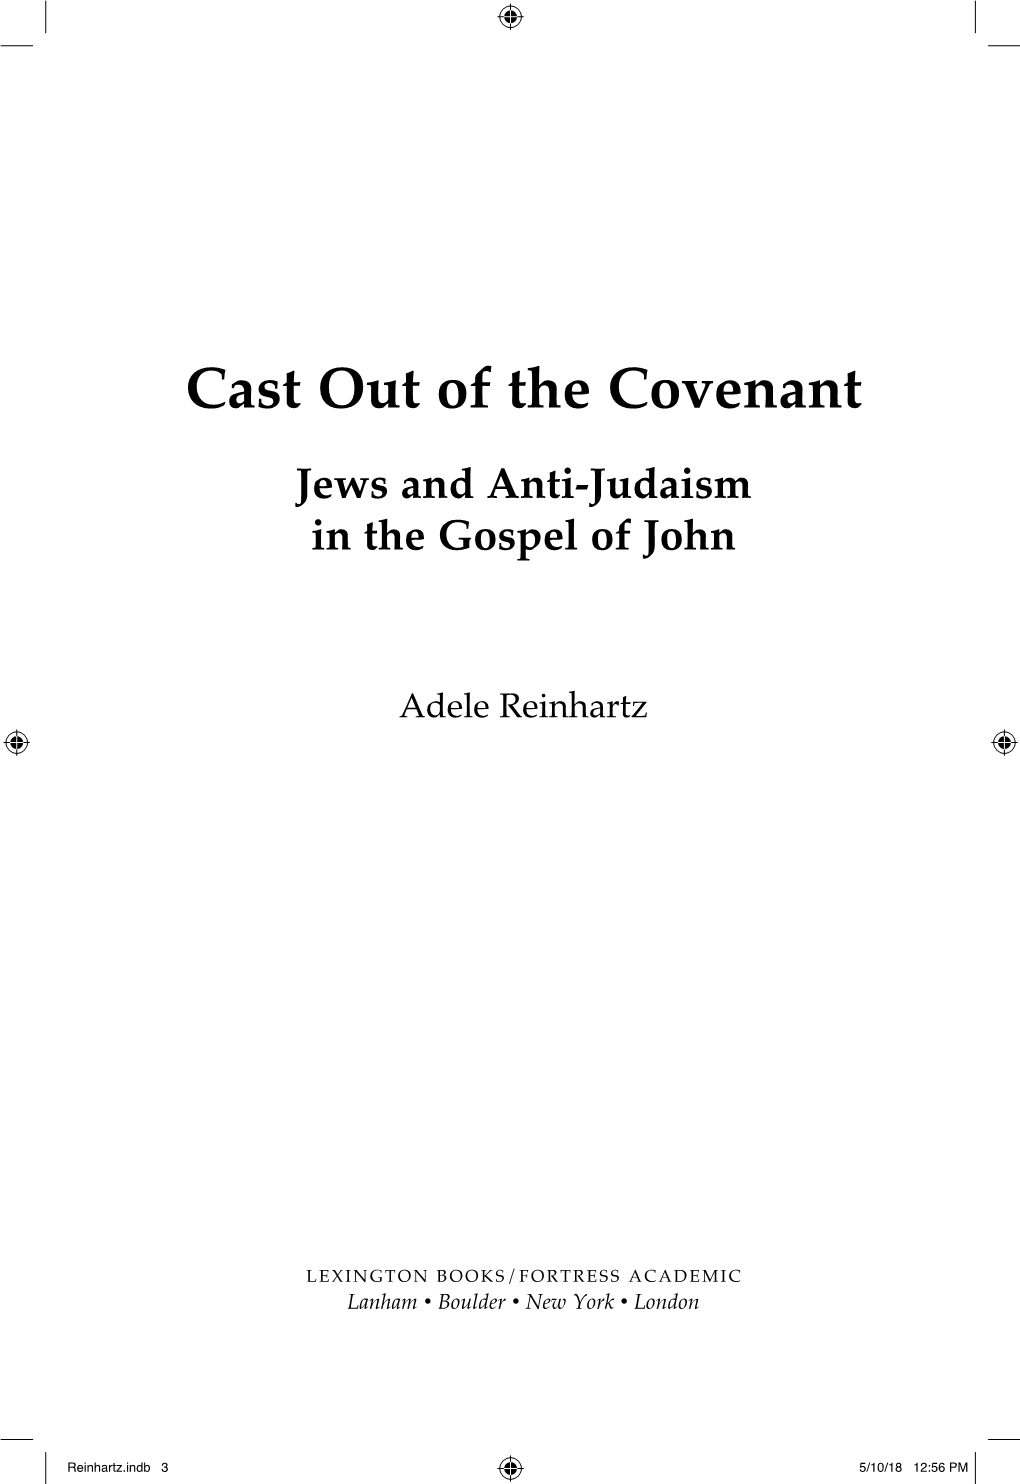 Cast out of the Covenant Jews and Anti-Judaism in the Gospel of John